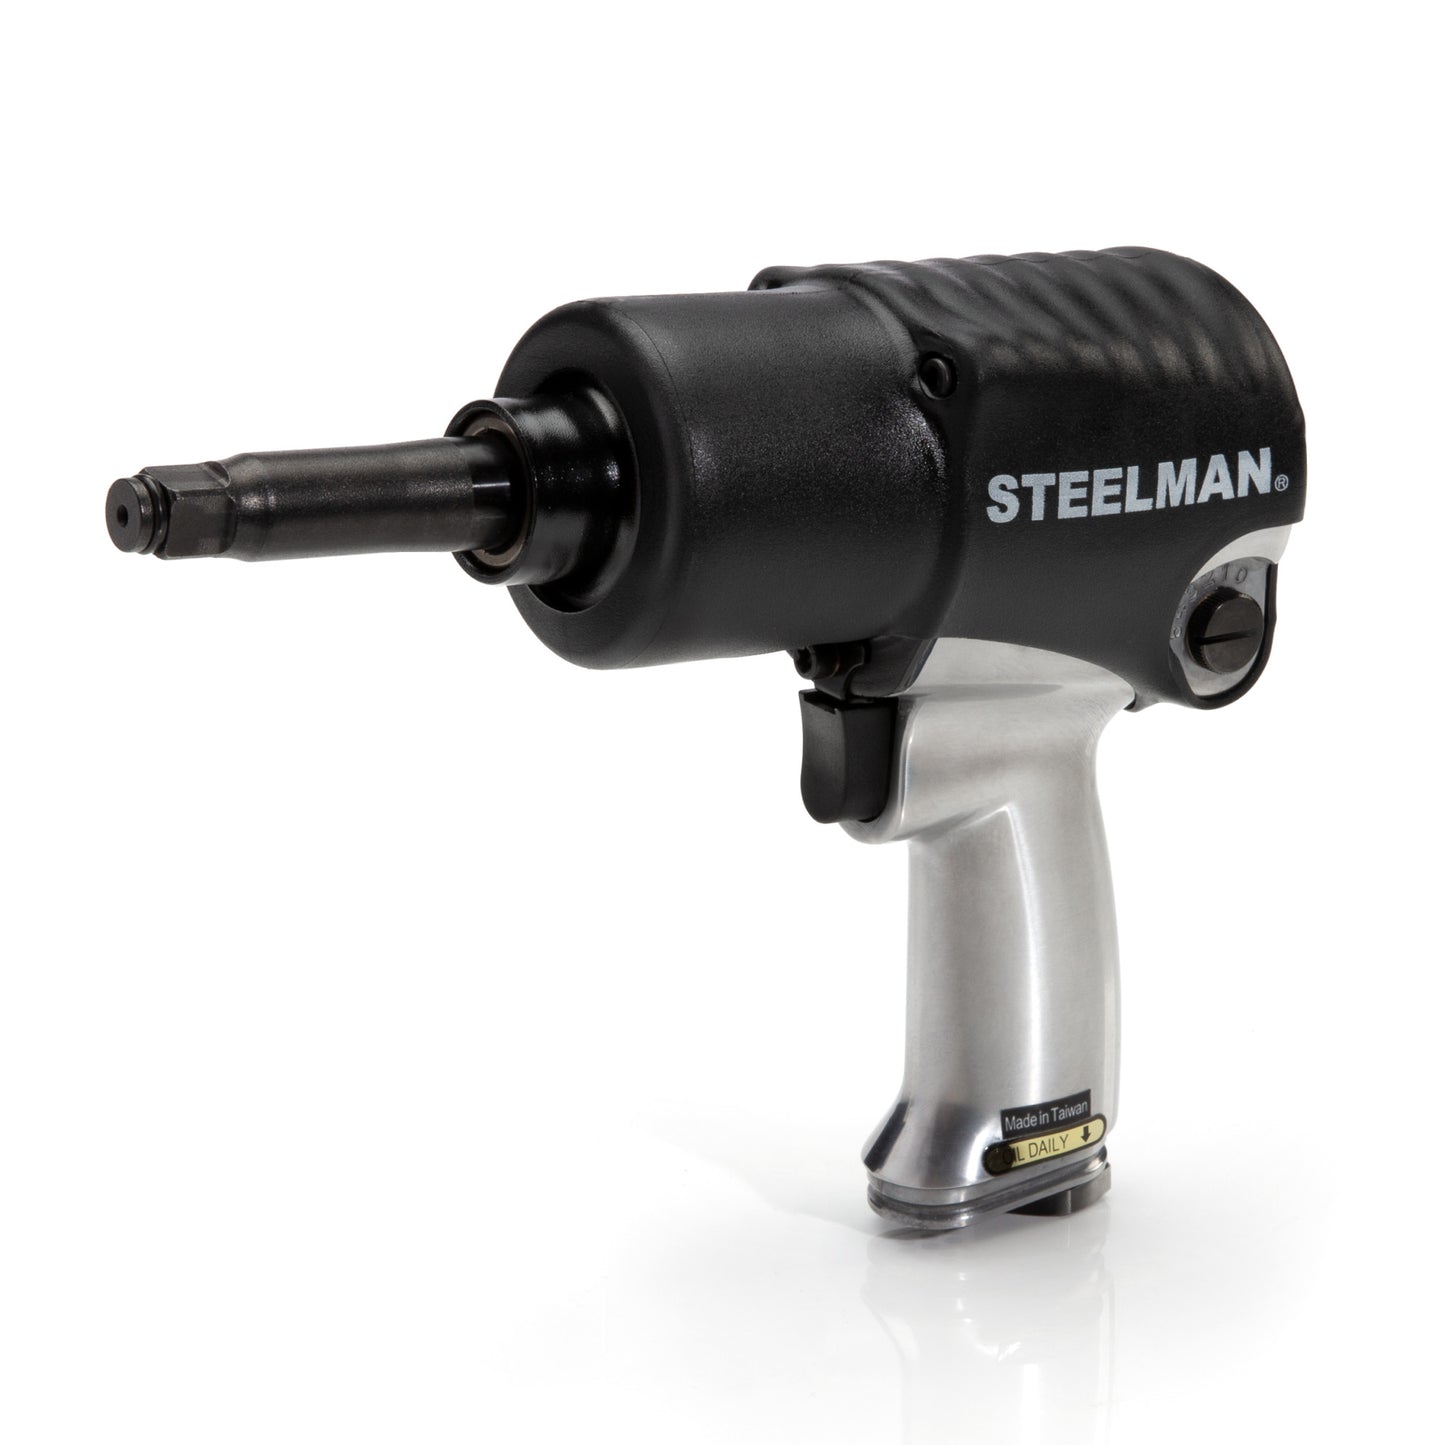 The STEELMAN 1/2-inch Drive Heavy-Duty Twin Hammer Impact Wrench with 2-inch Anvil is ideal for standard and heavy-duty automotive use. The variable speed trigger provides optimum speed control of the pneumatic motor.